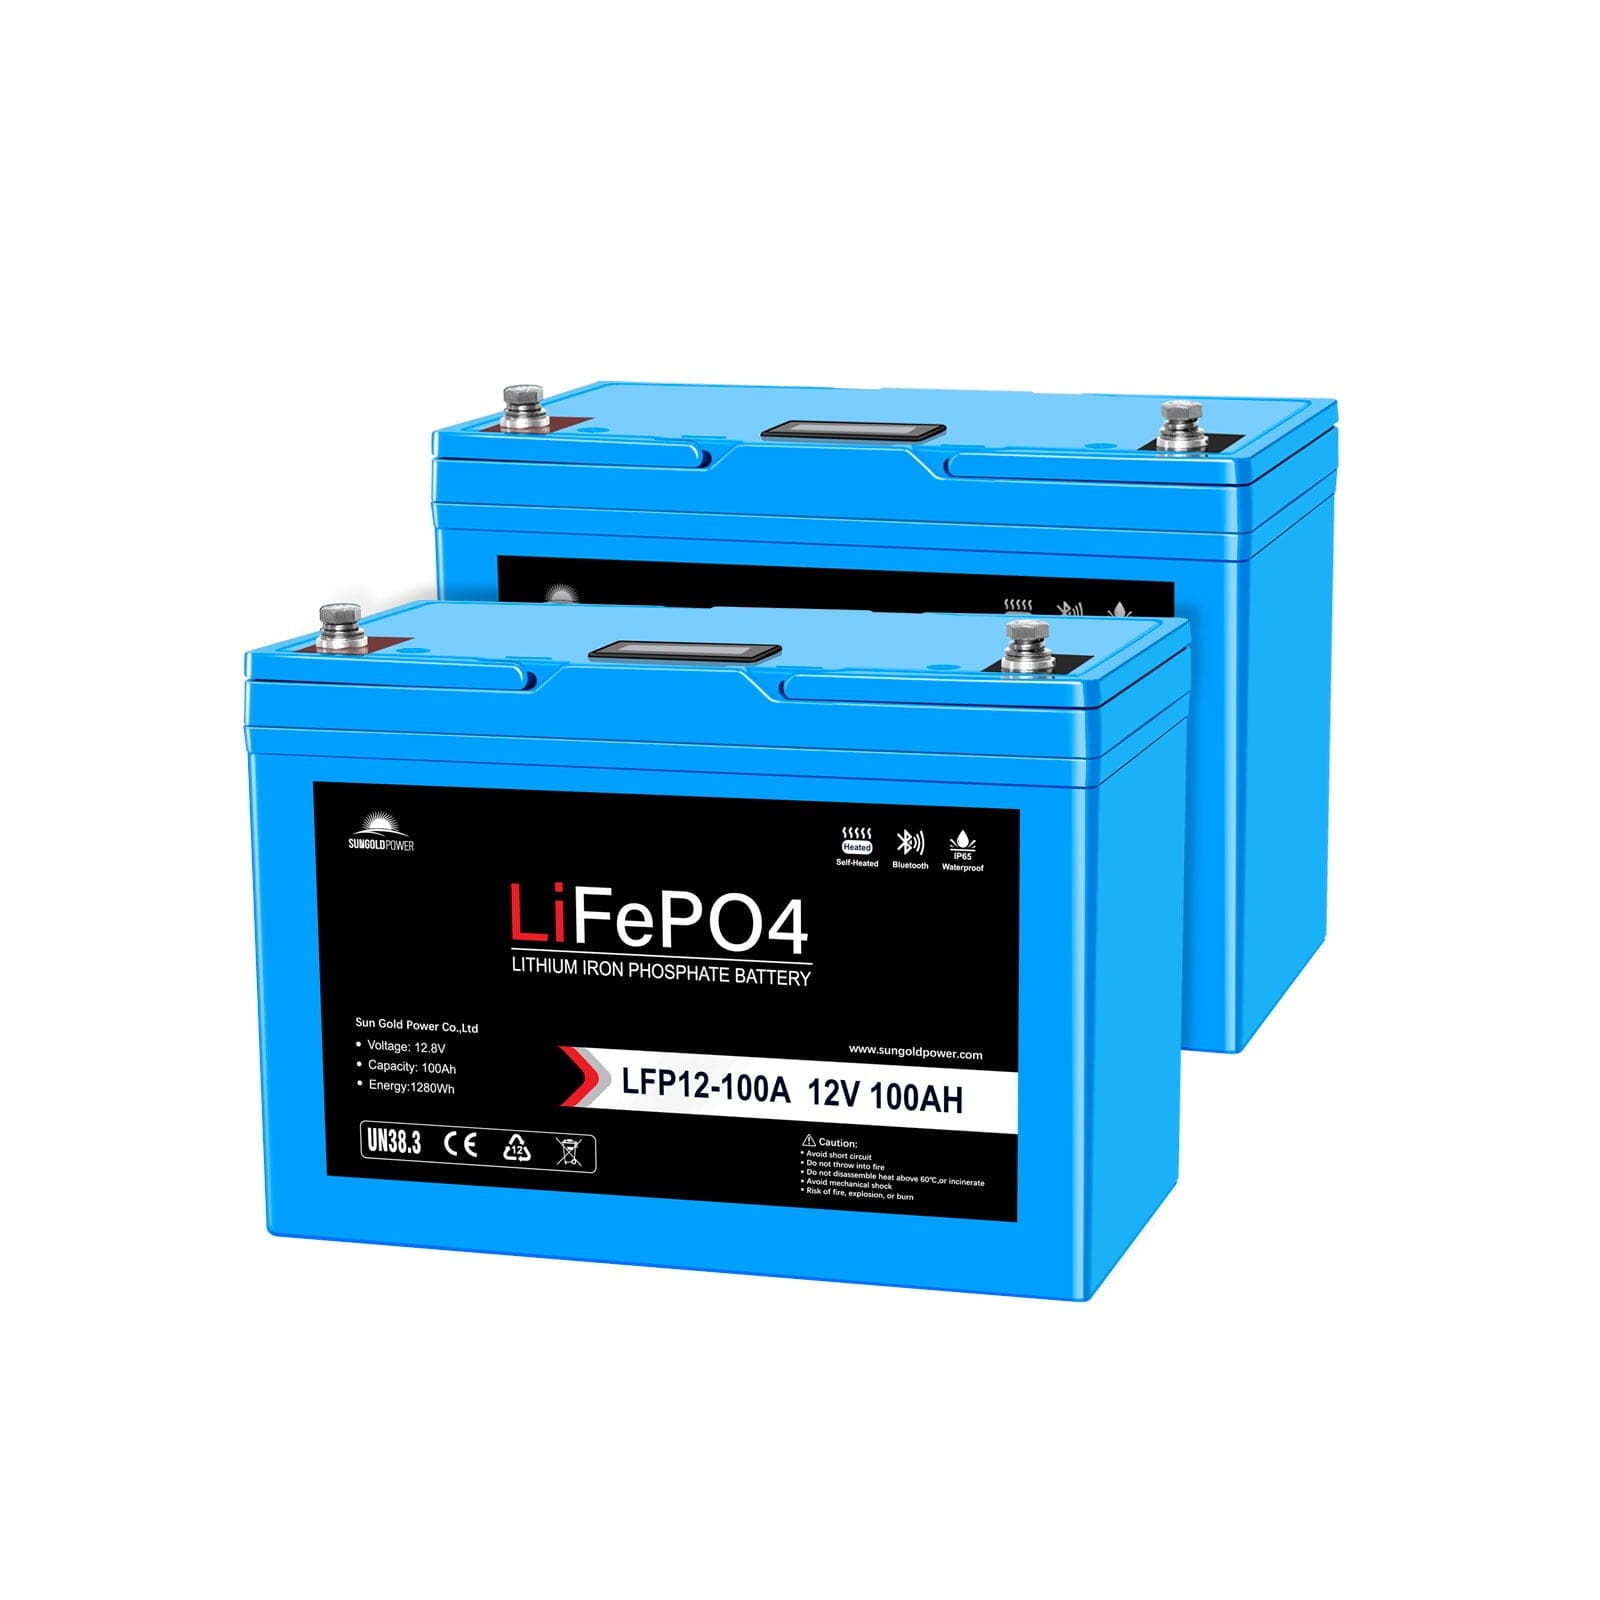 2 X 12V 100AH LiFePO4 Deep Cycle Lithium Battery / Bluetooth /Self-heating / IP65 SunGoldPower Battery